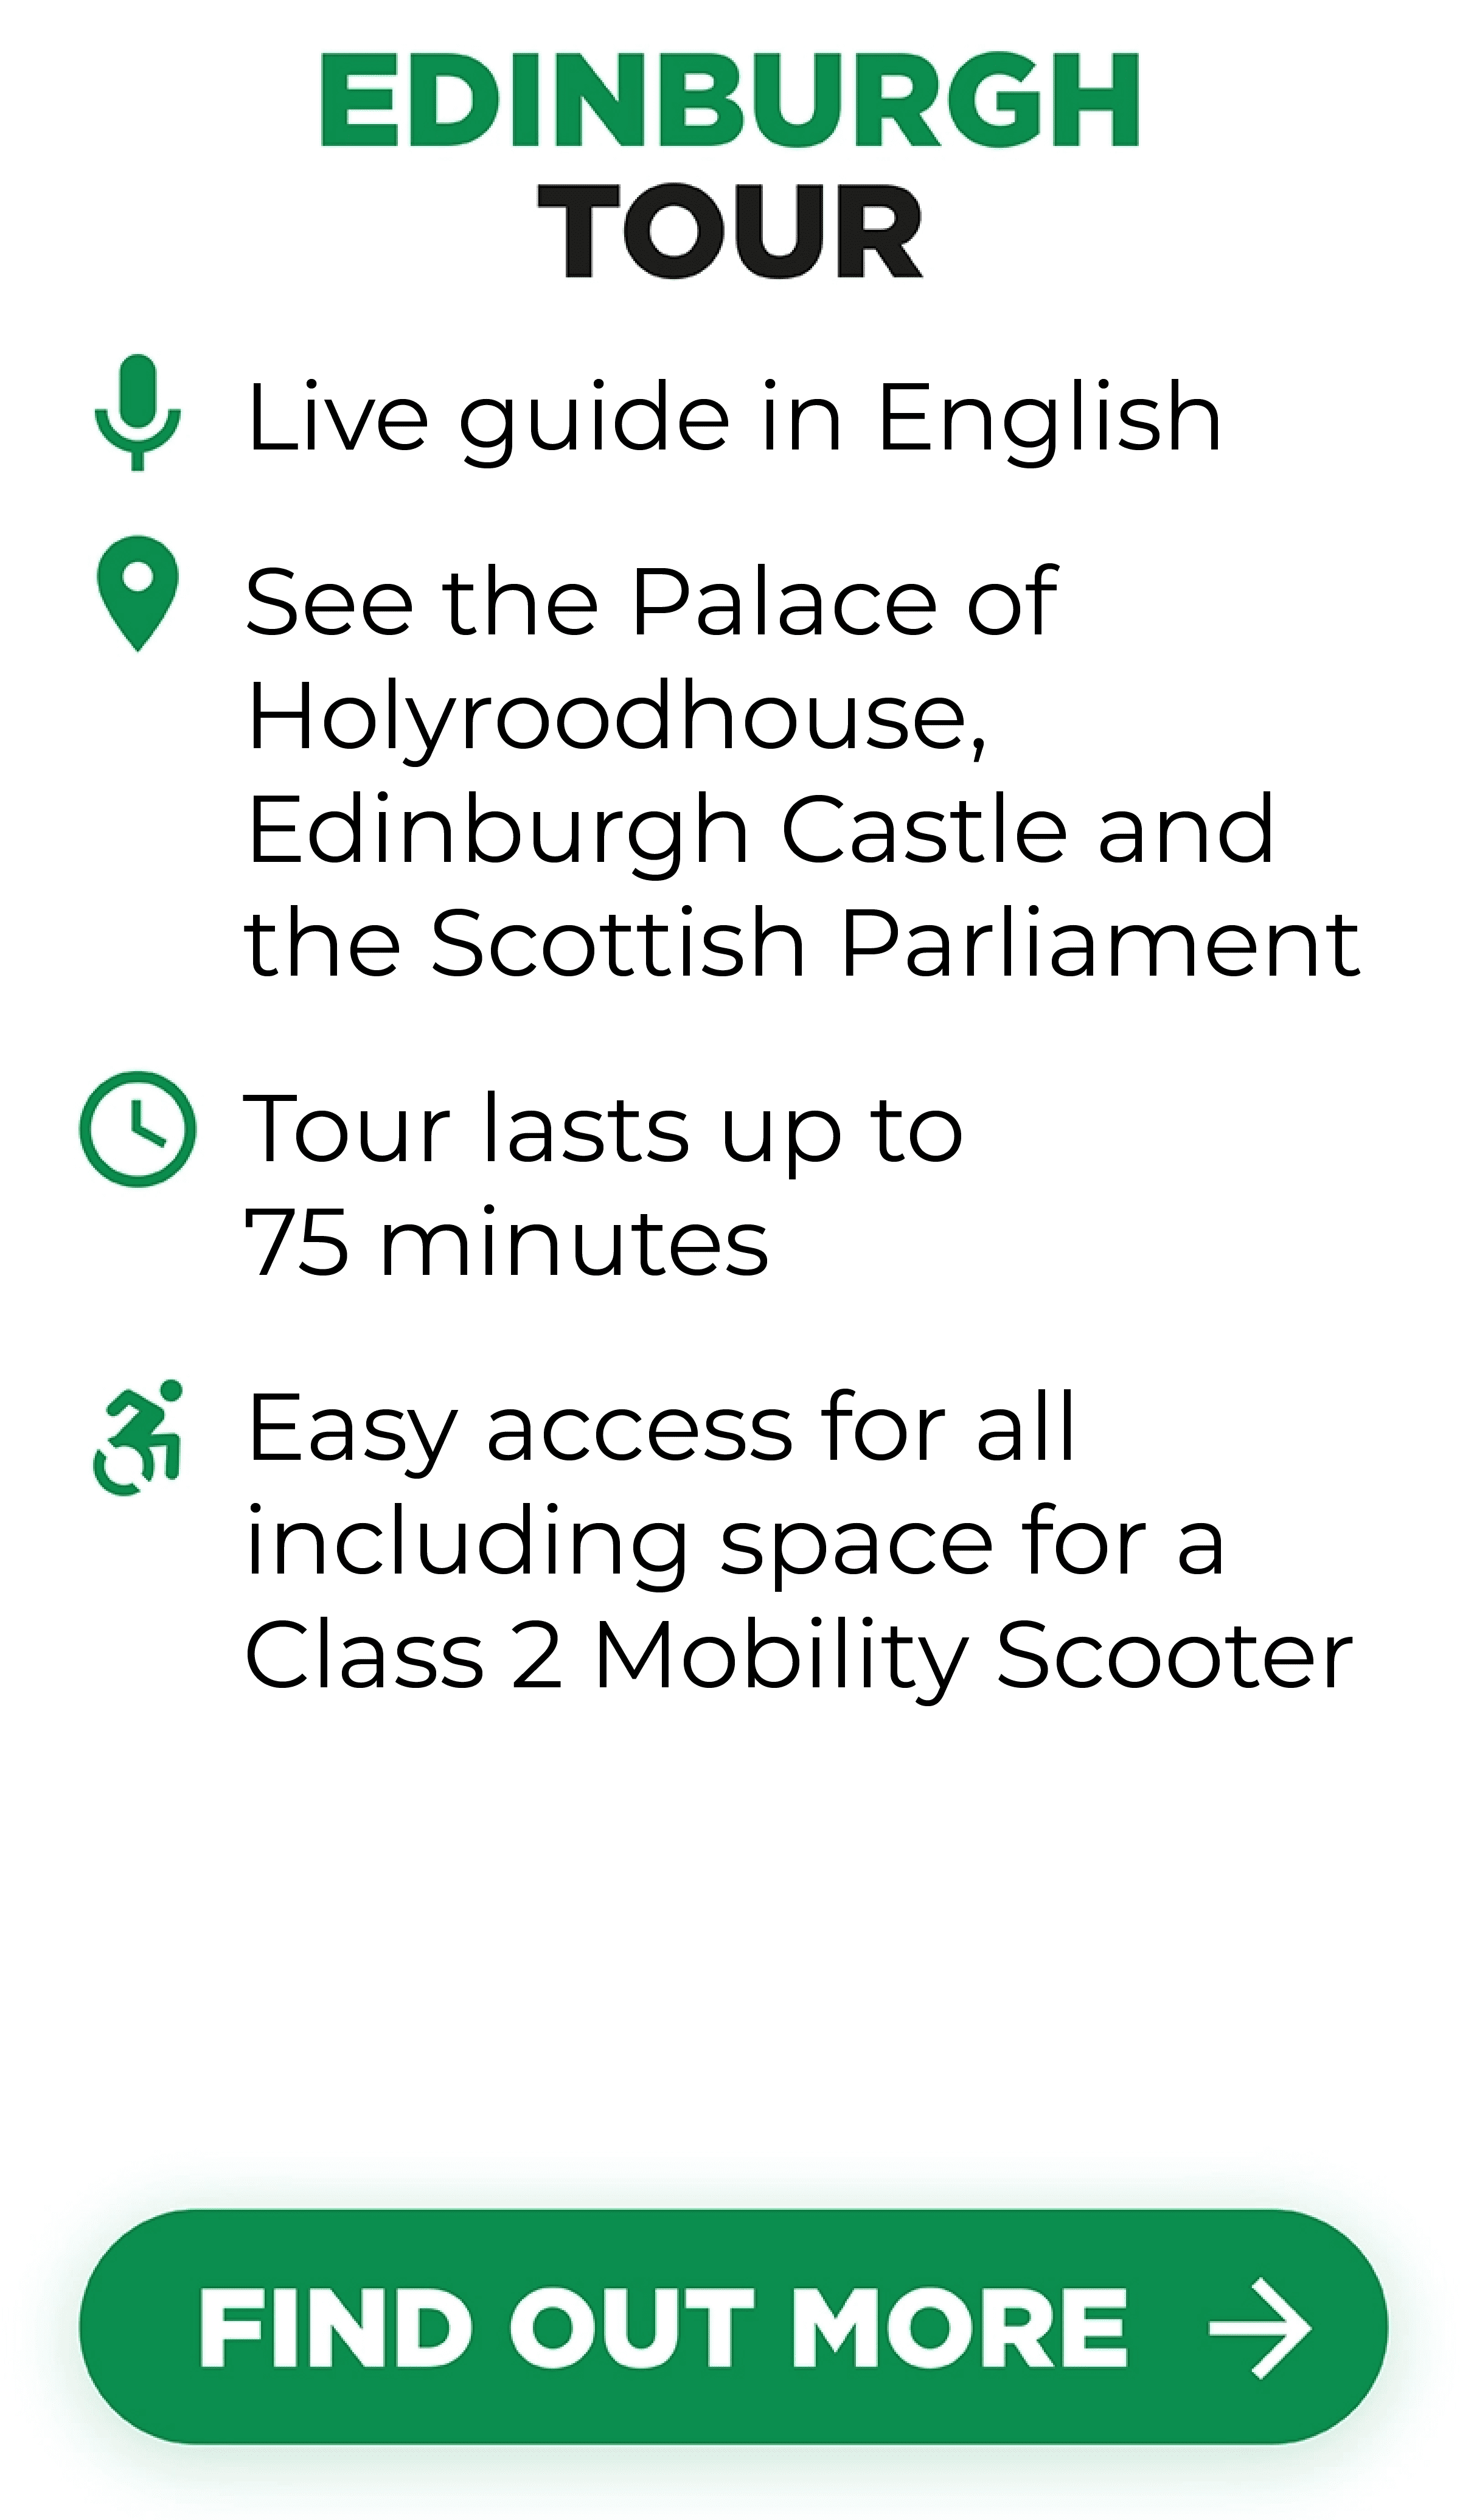 Edinburgh Tour Includes Live guide in English, Palace of Holyroodhourse, Edinburgh Castle and Georgian New Town. Tour lasts up to 75 minutes and it is easily accessible for all, including space for a Class 2 Mobility Scooter.